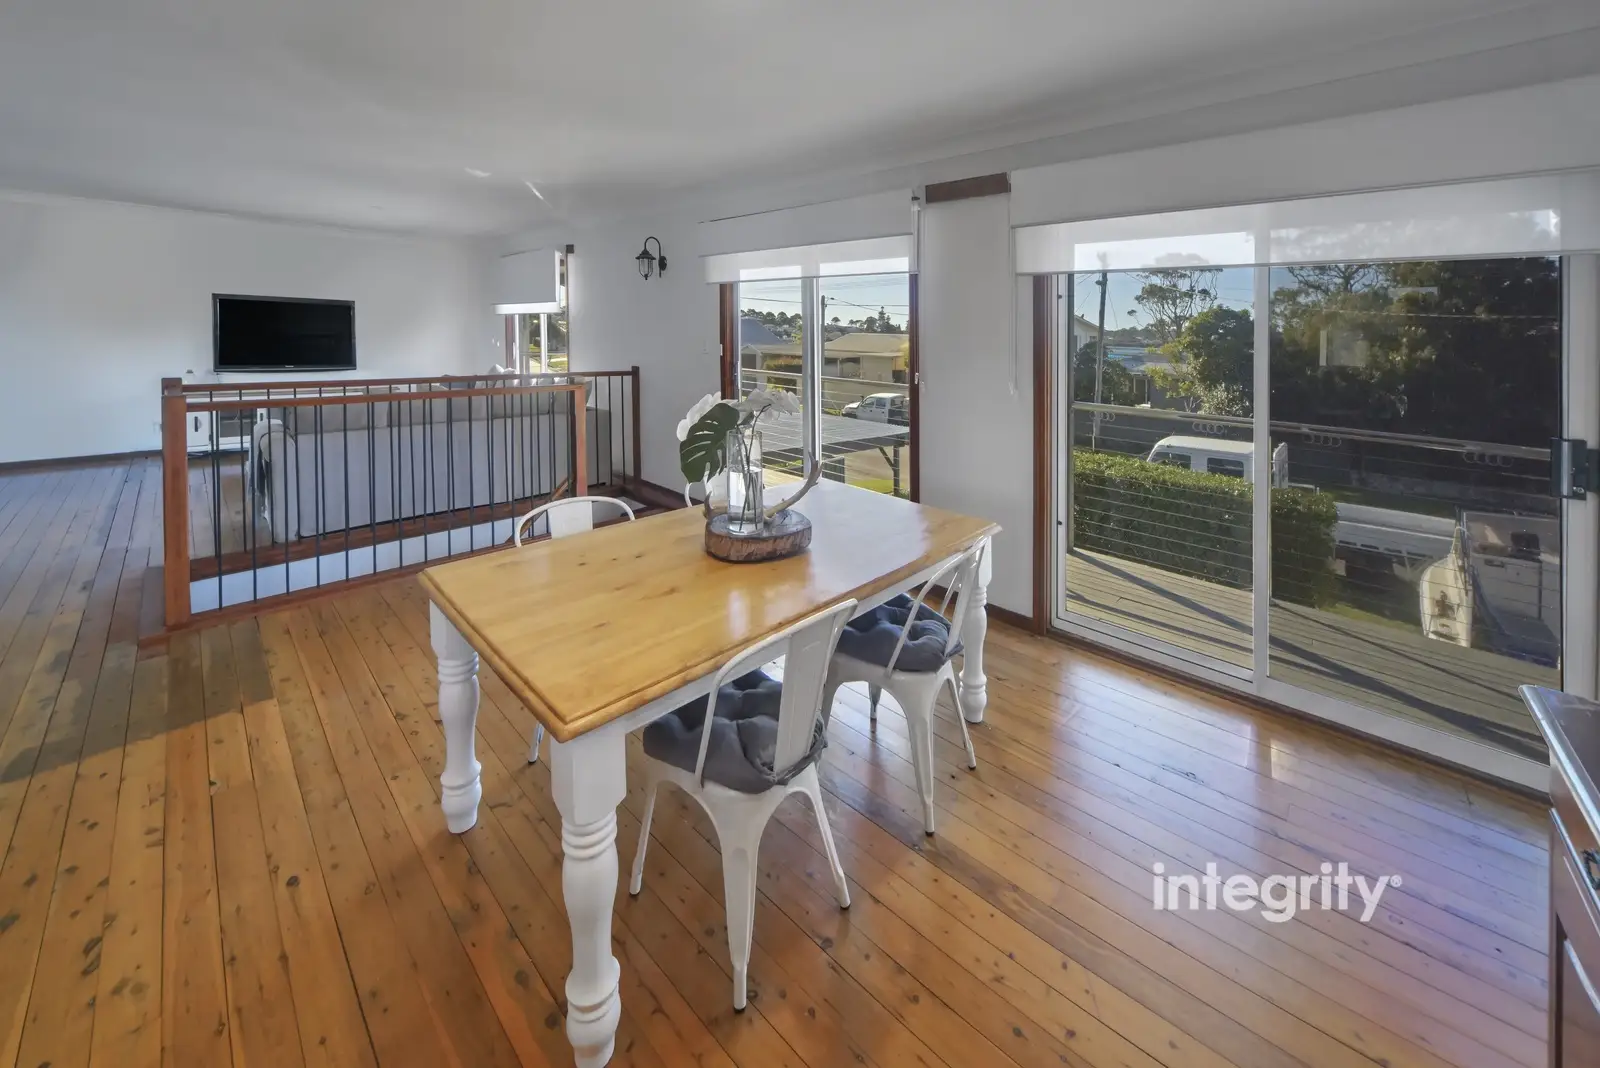 21 Haiser Road, Greenwell Point For Sale by Integrity Real Estate - image 5